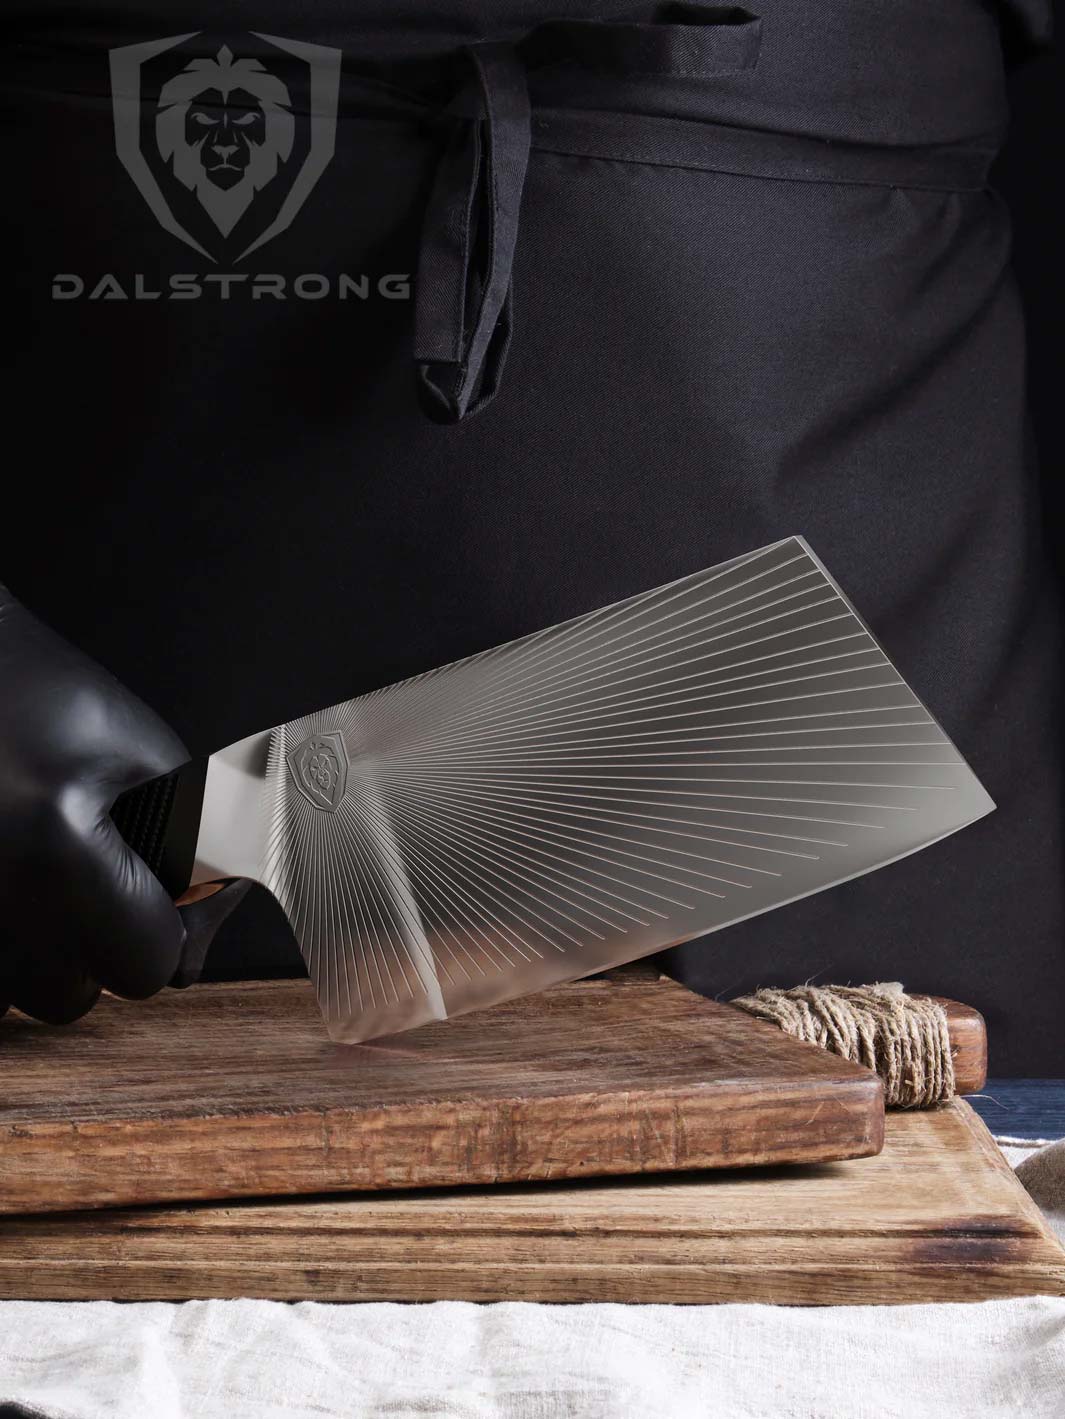 Dalstrong quantum 1 series 7 inch cleaver knife with dragon skin handle on top of a wooden cutting board.